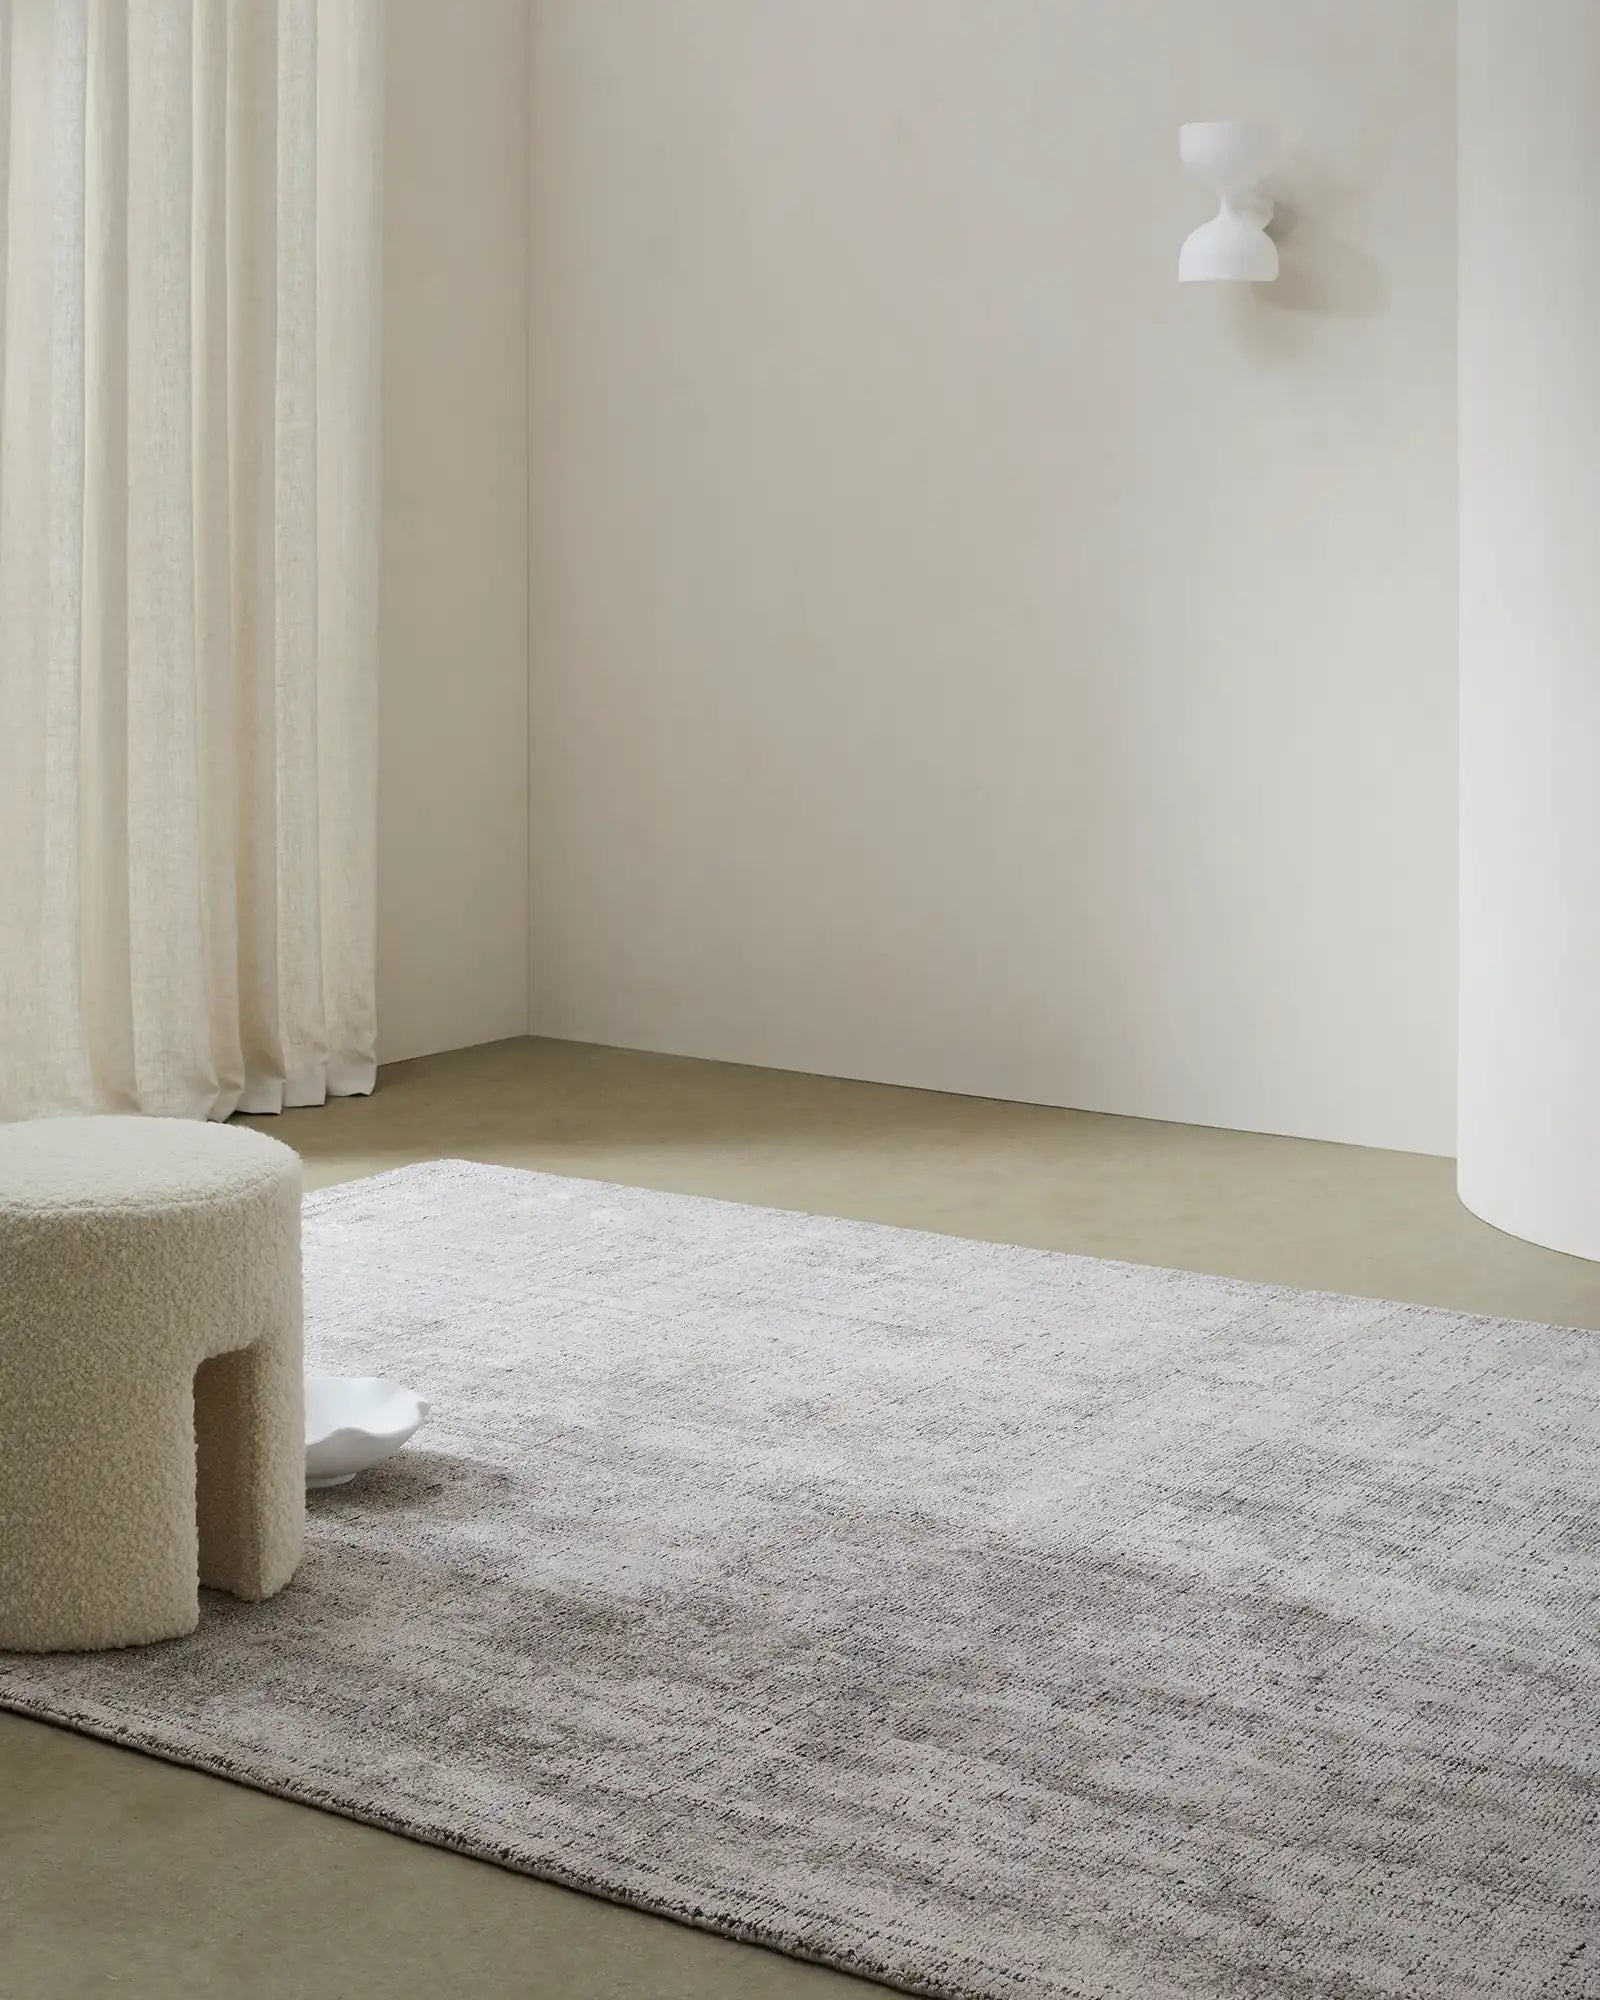 Display of the rug's size and scale in a living space, demonstrating its versatility for different room sizes.